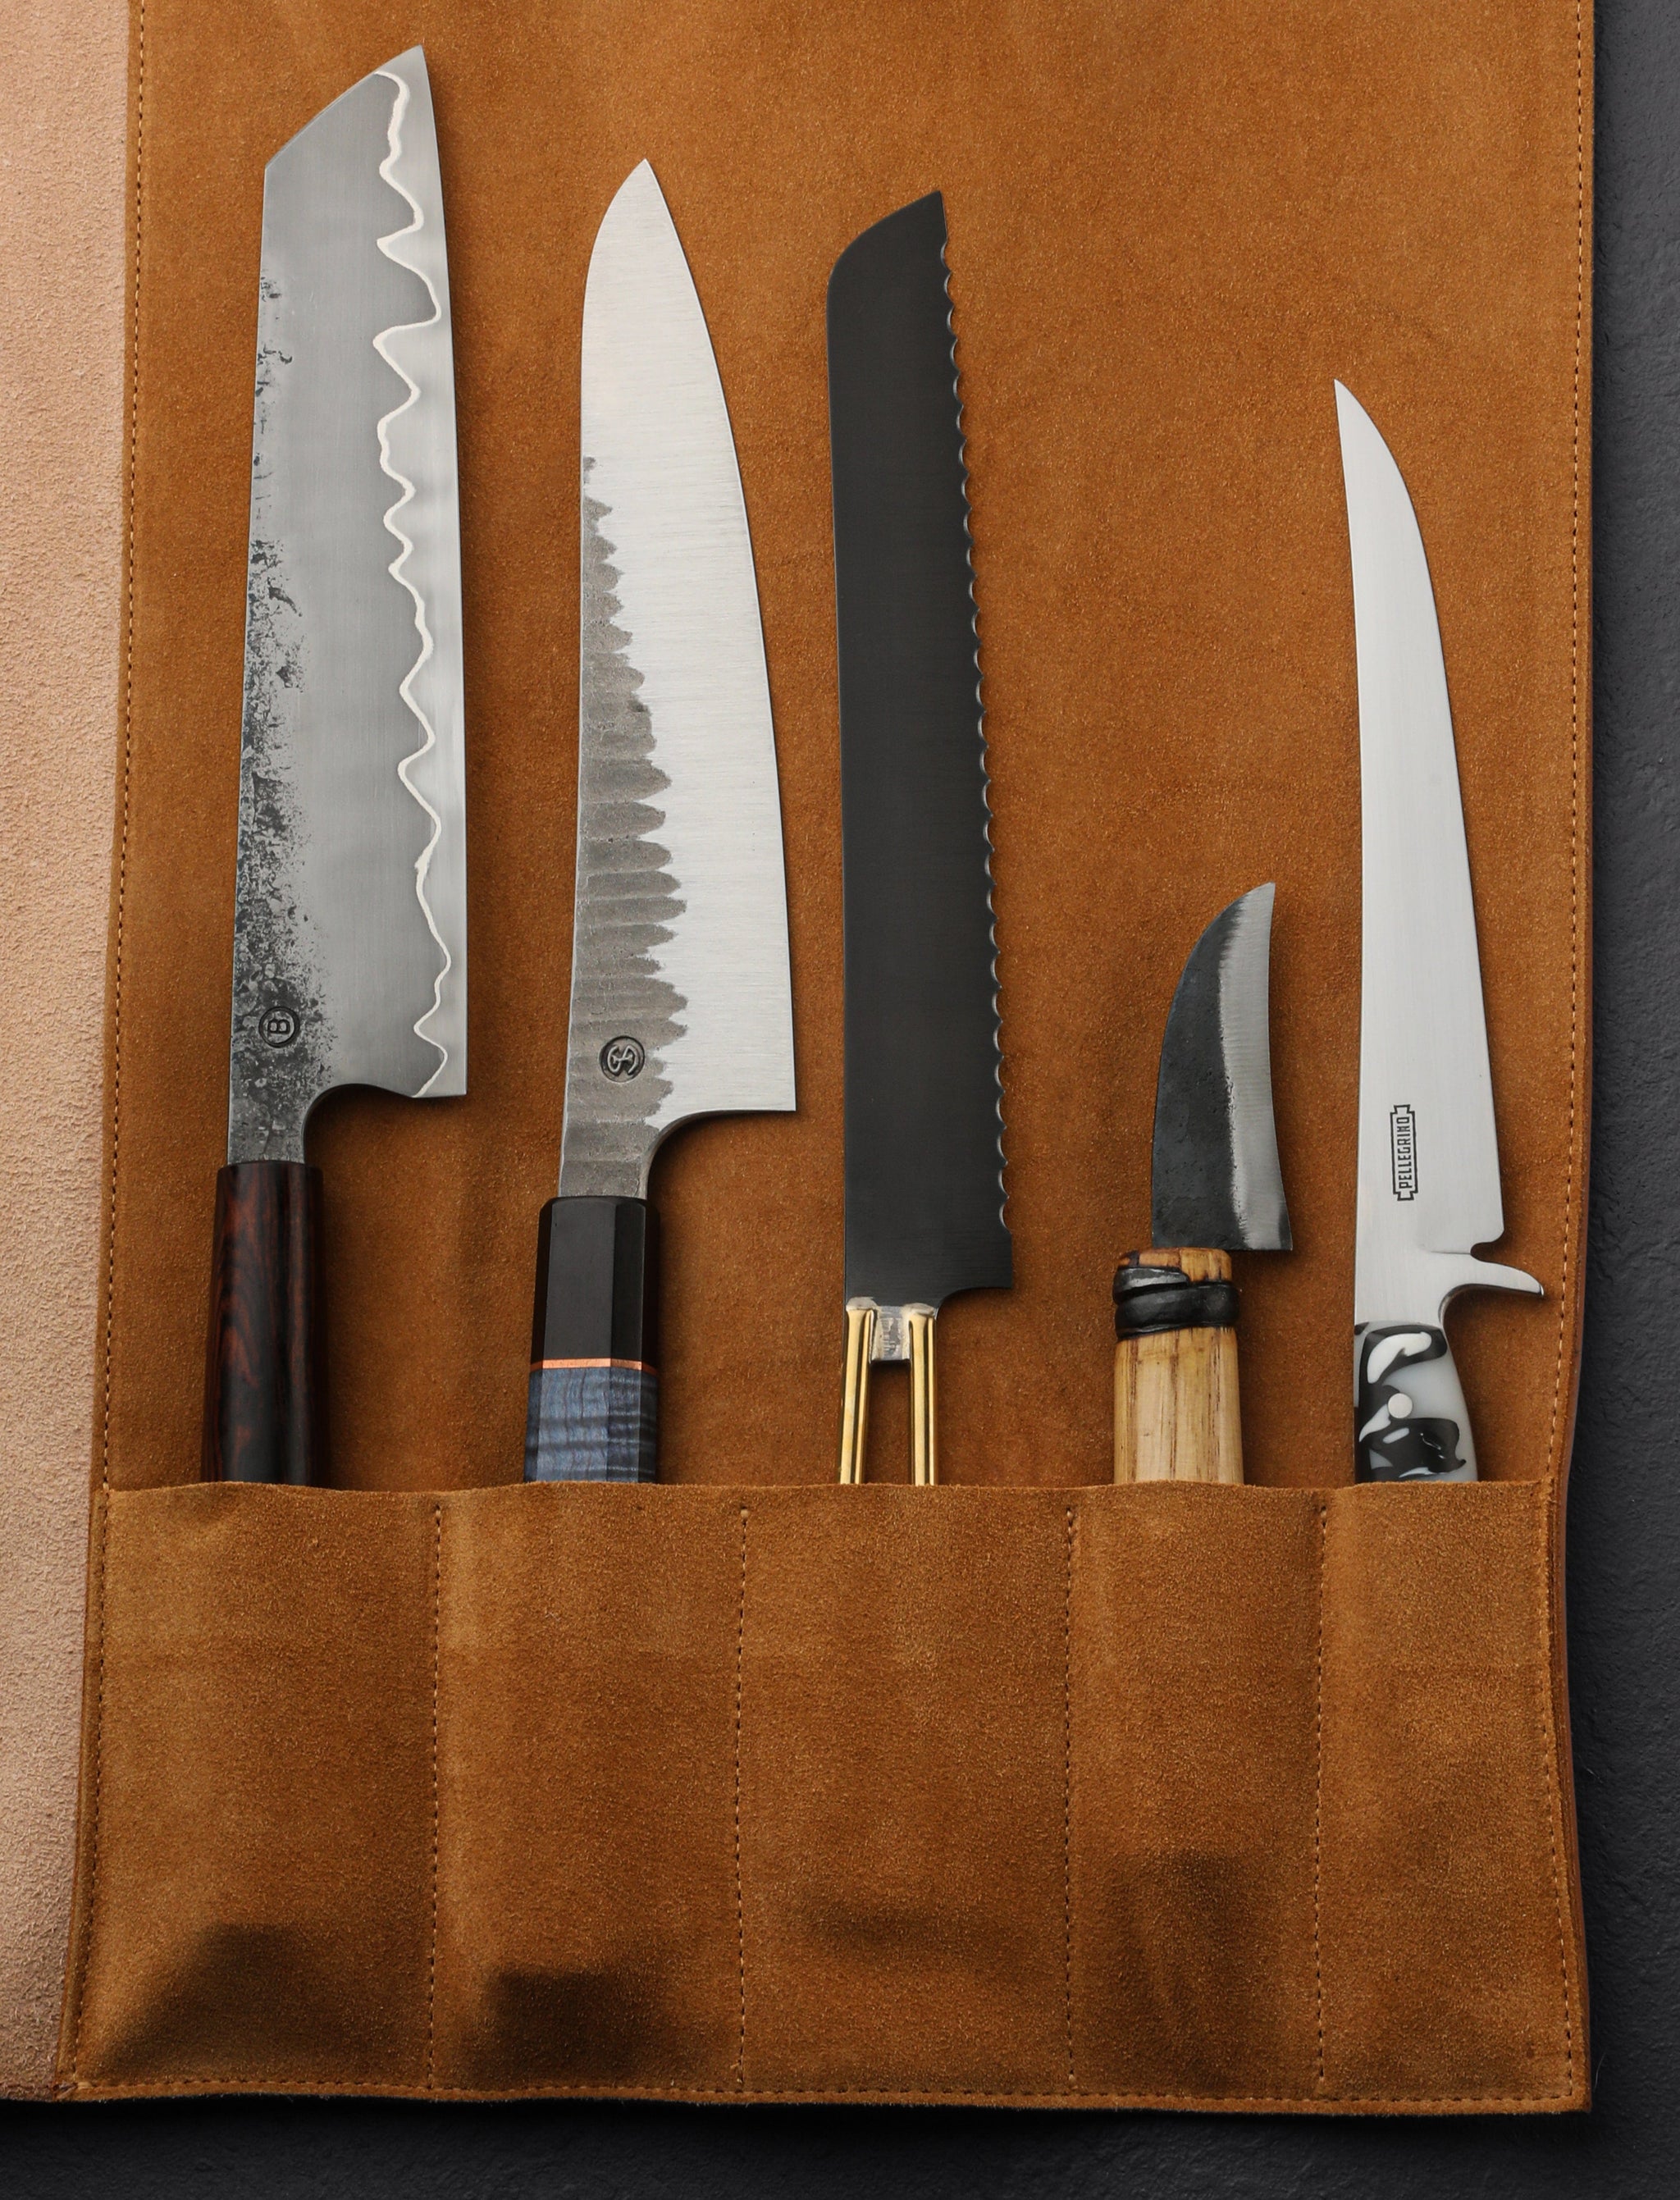 Carbon Steel Chef Knife Set With Rolling Leather Bag Green